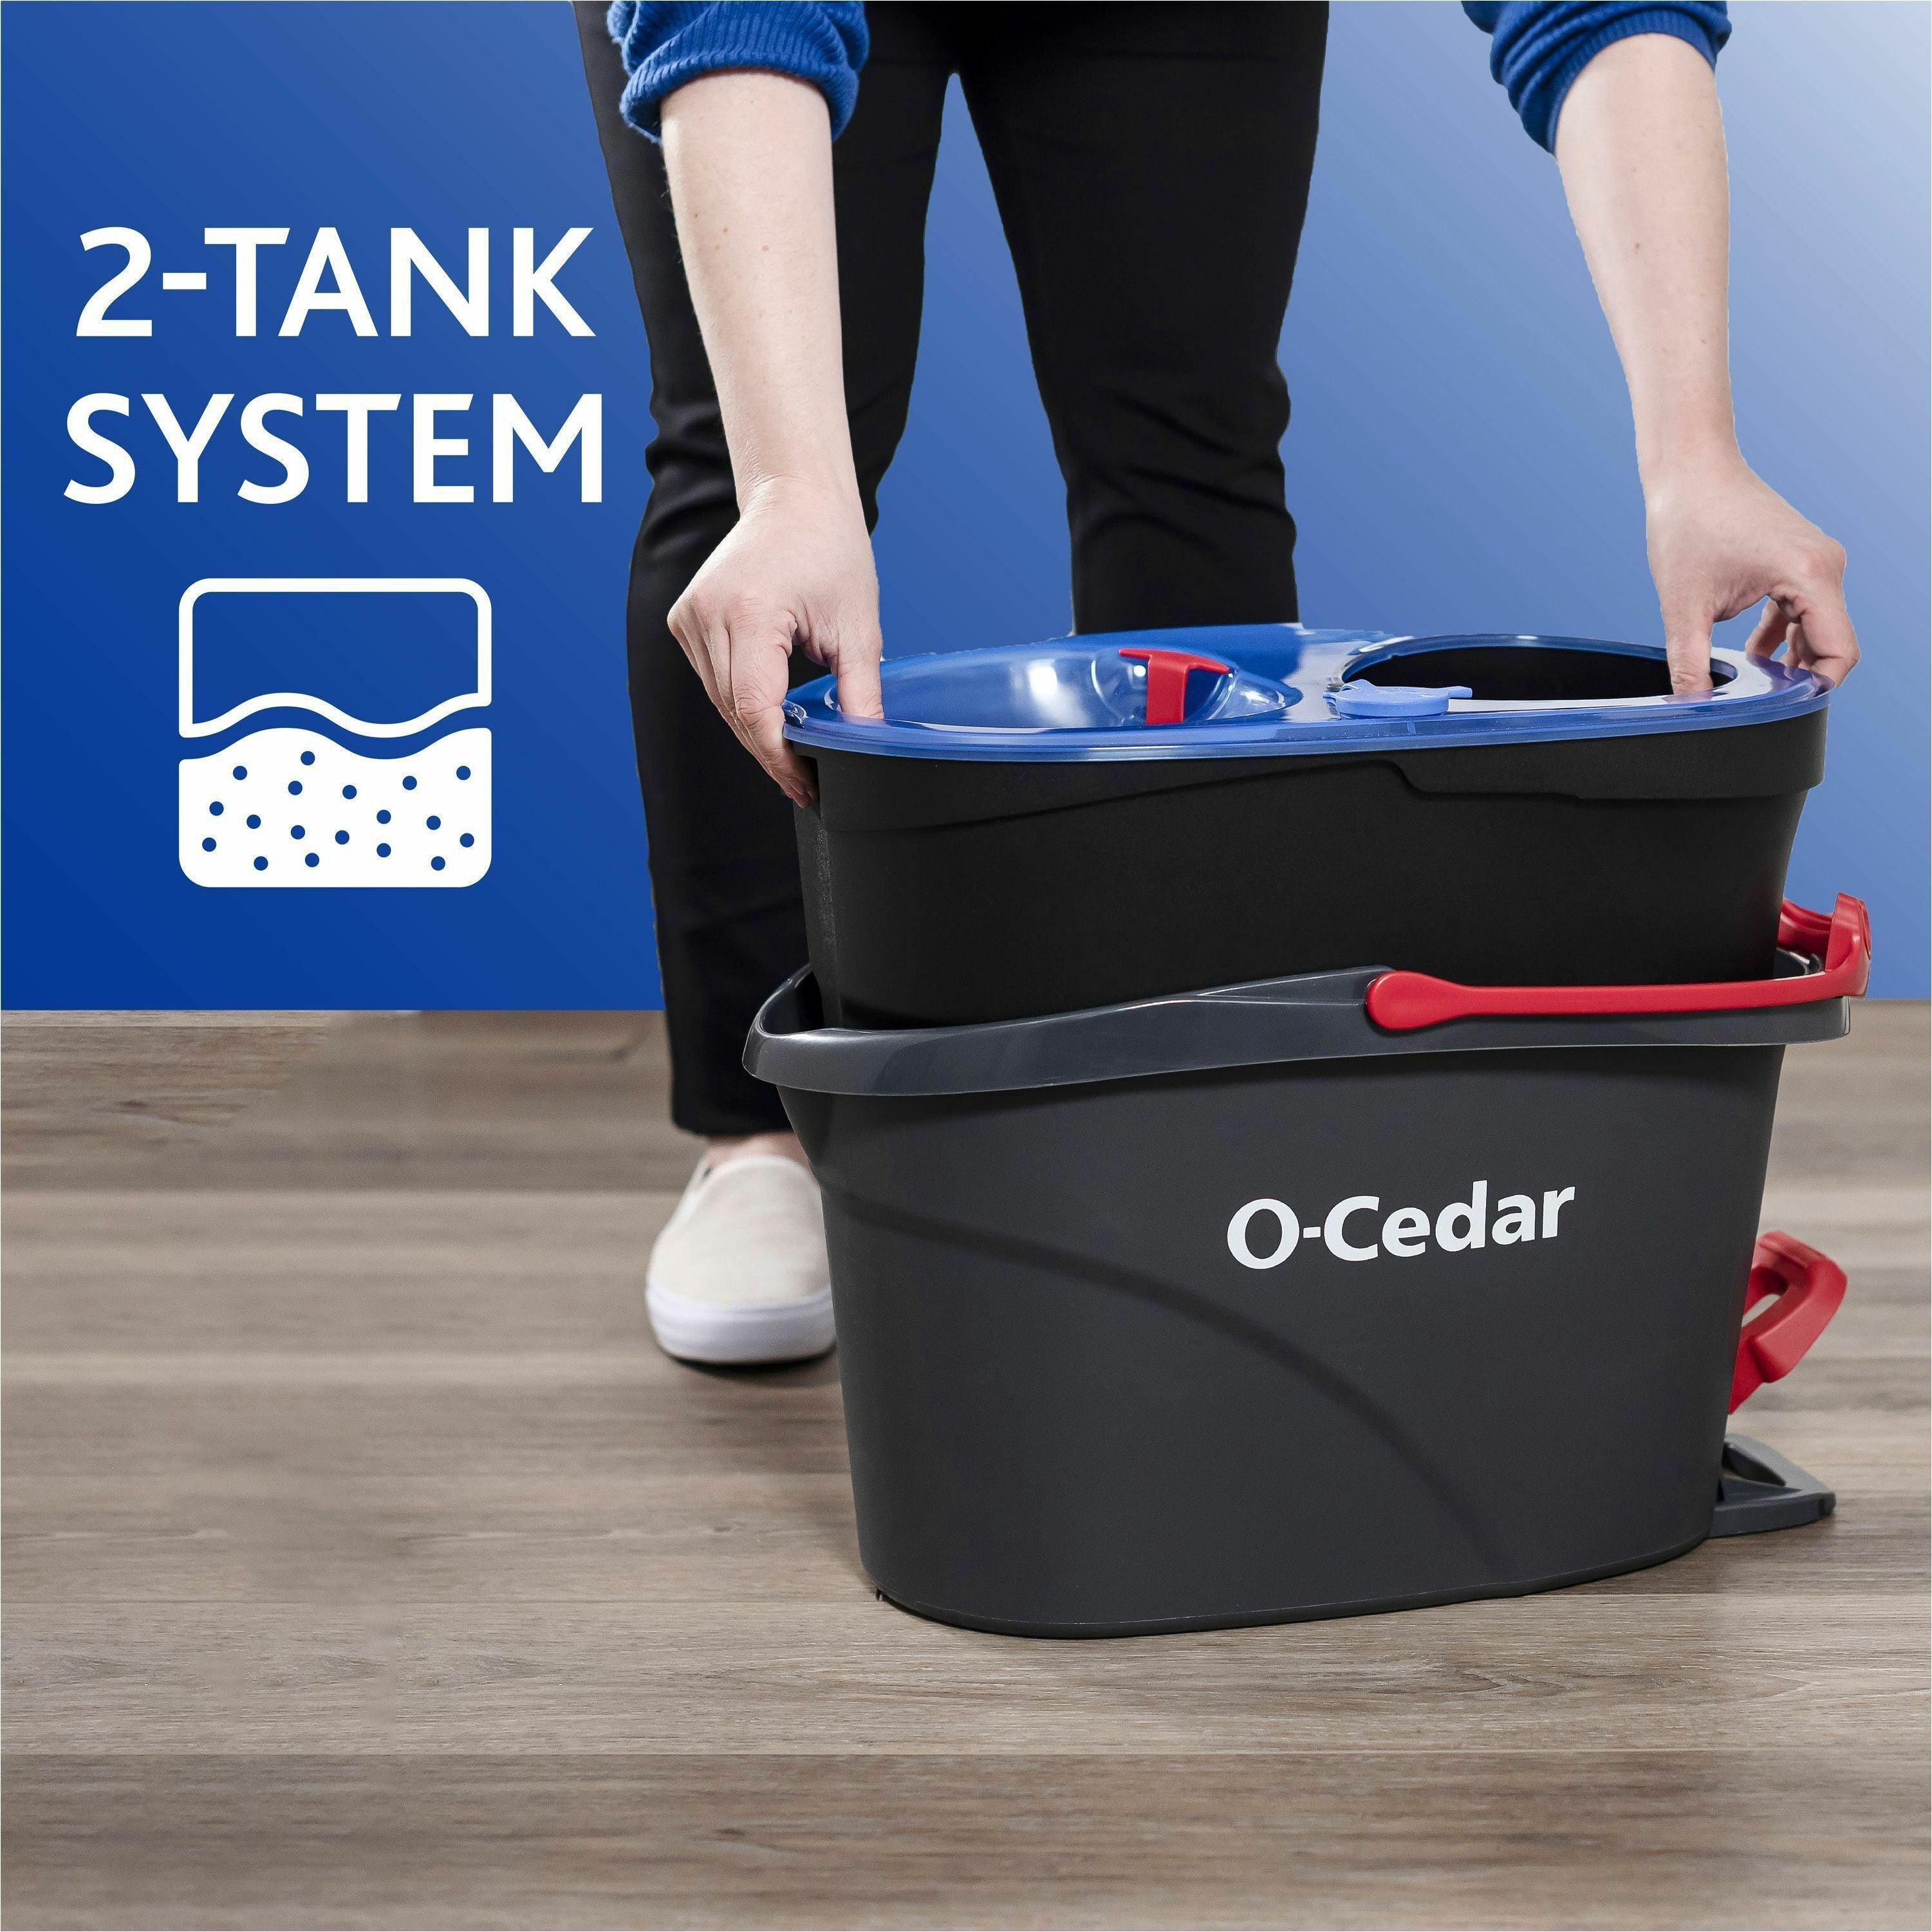 o-cedar-easywring-rinseclean-spin-mop-microfiber-head-washable-reusable-machine-washable-refillable-telescopic-handle-1-each-multi_fhp168534 - 2